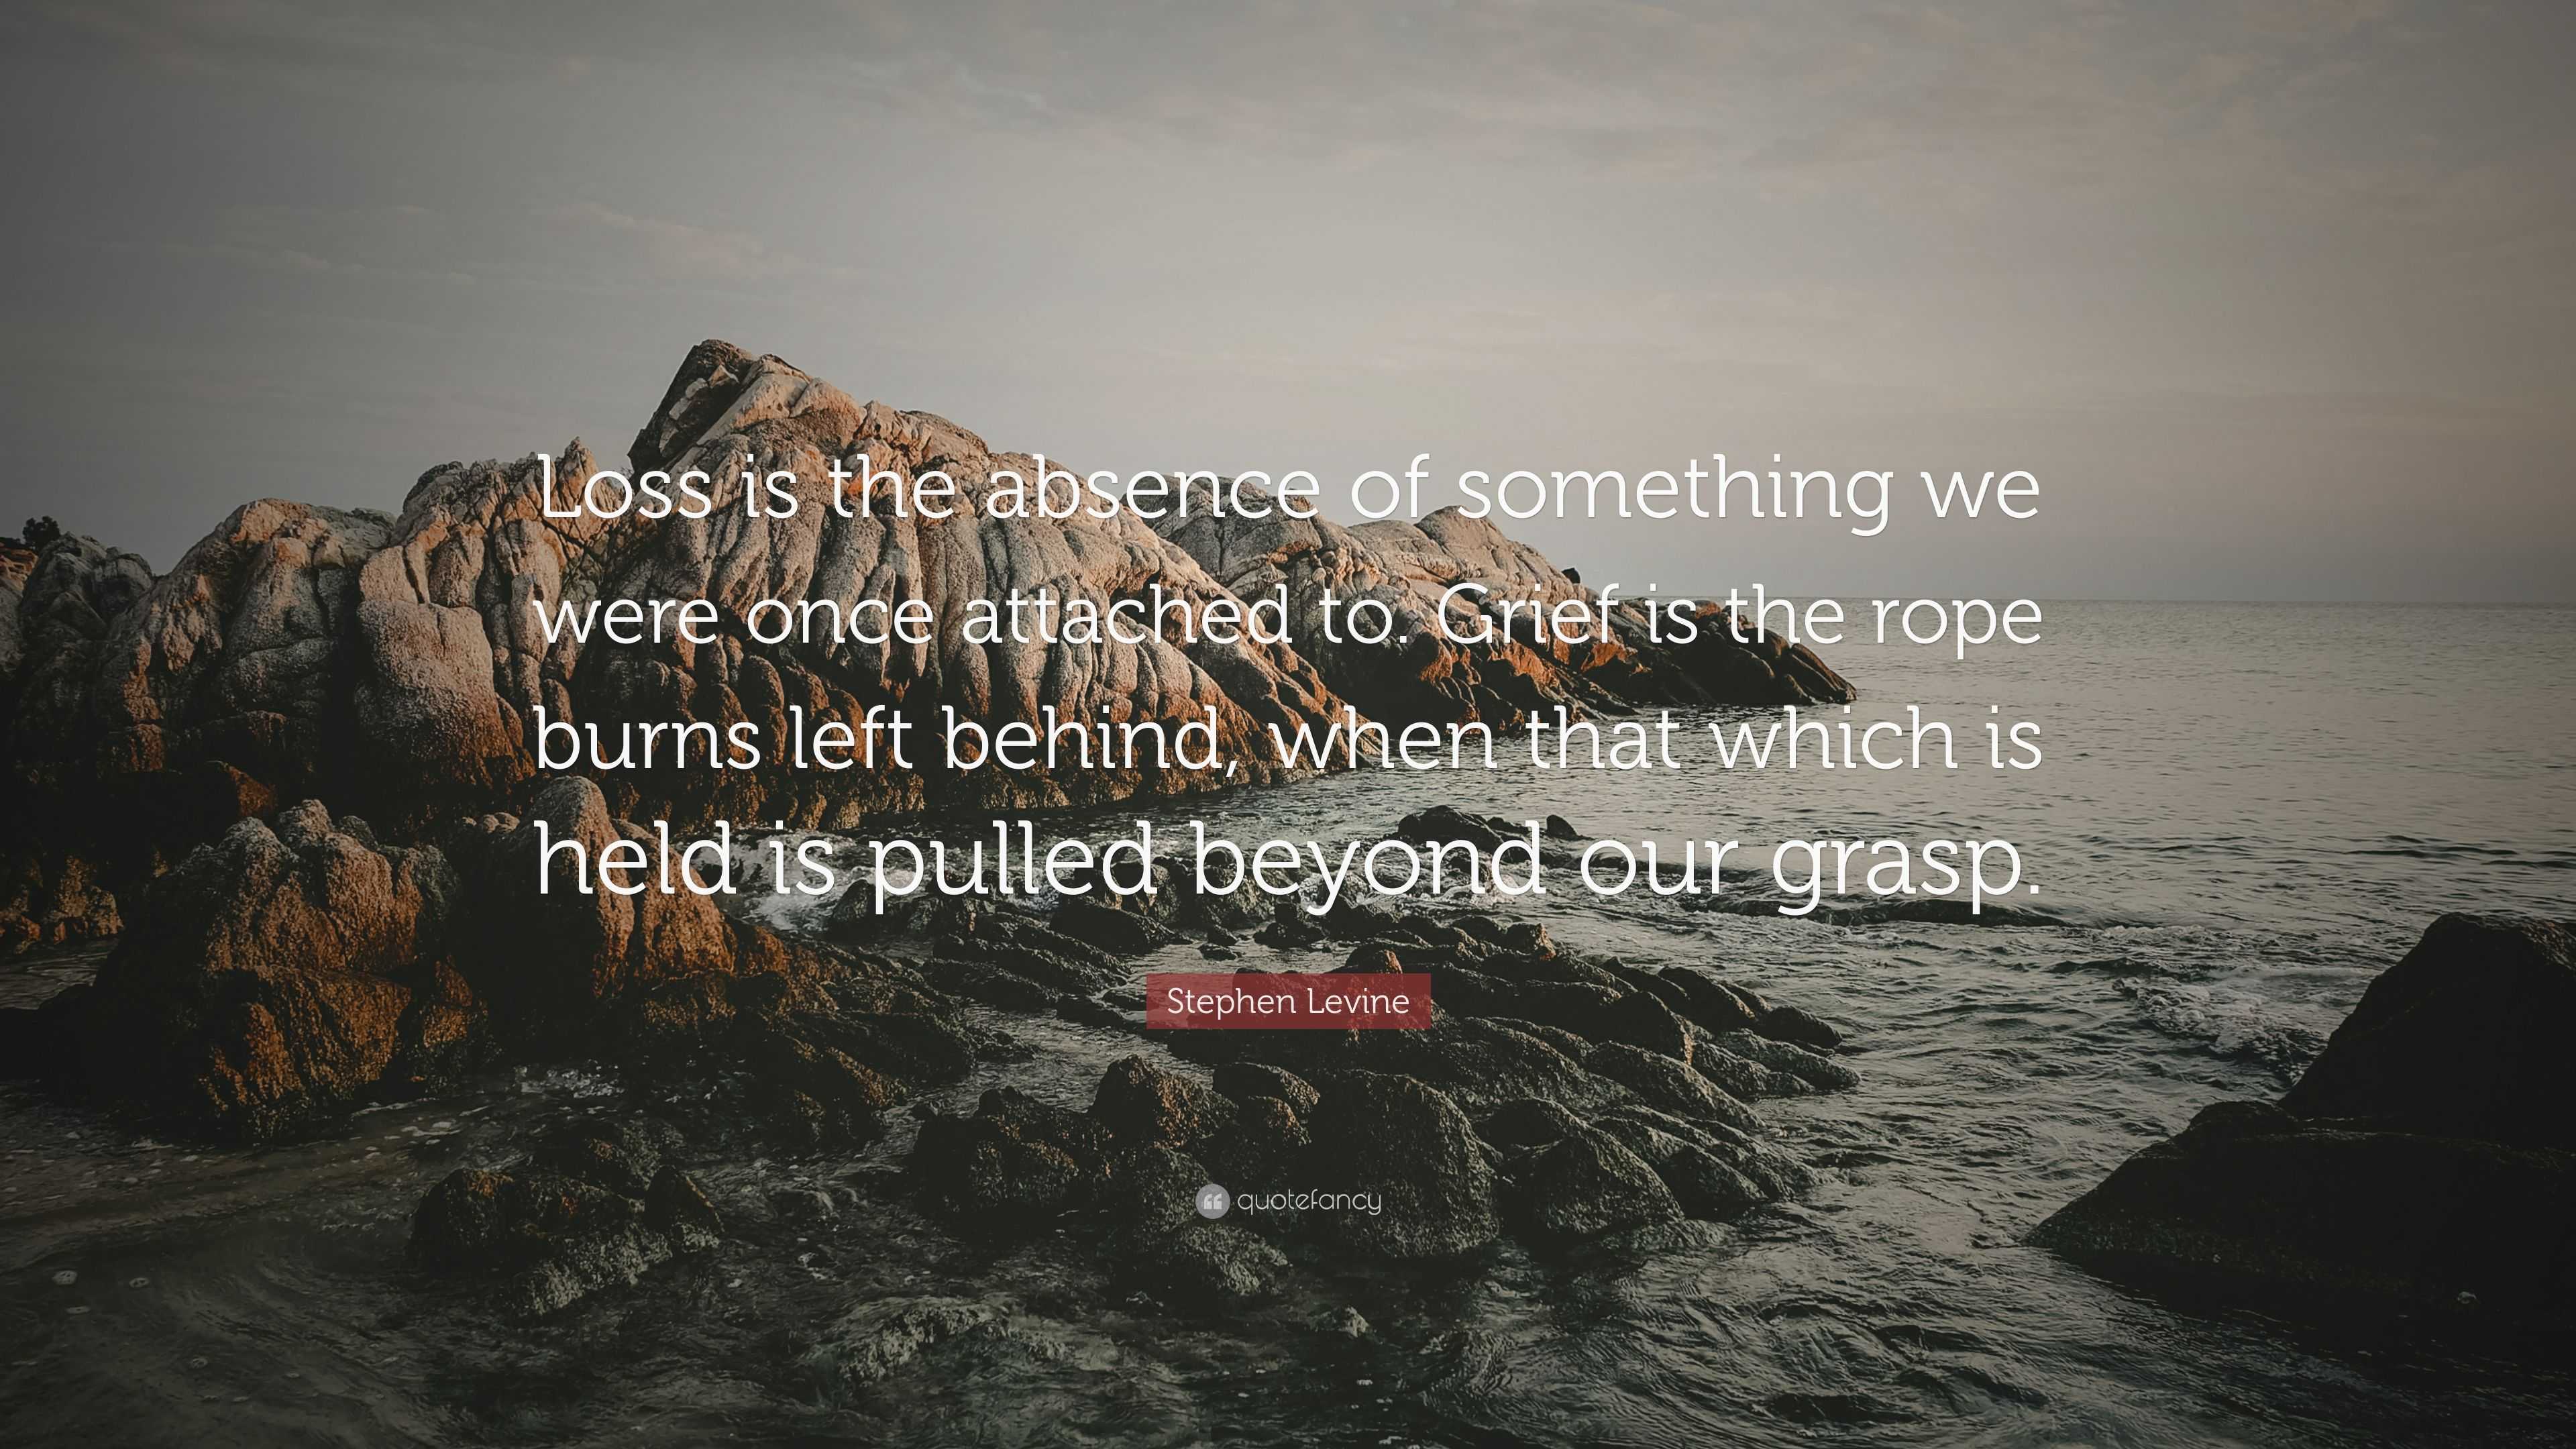 Stephen Levine Quote: “Loss is the absence of something we were once ...